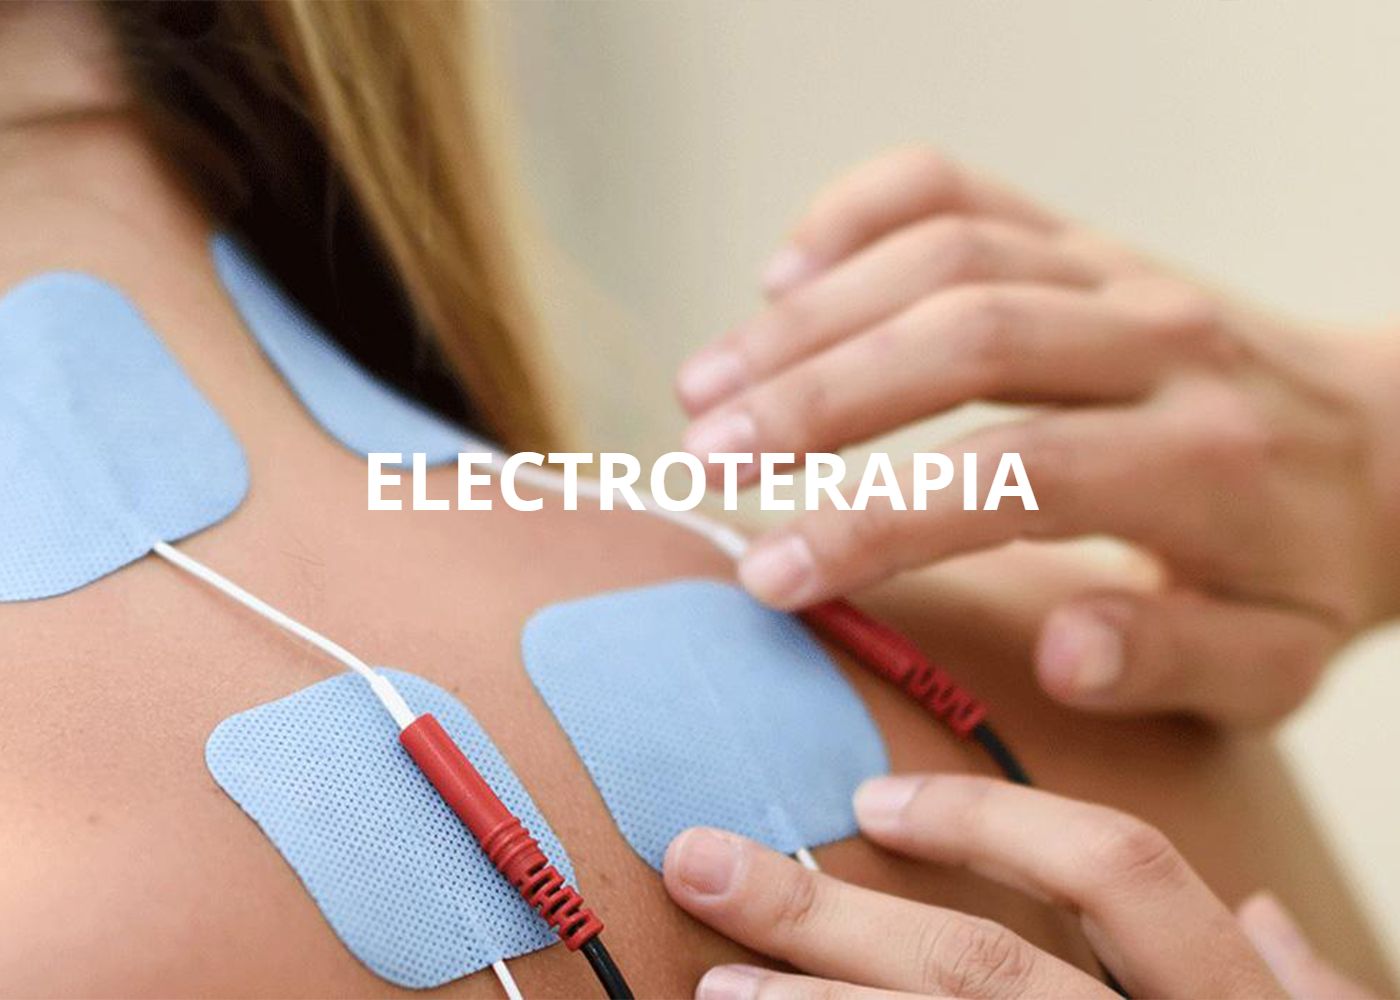 <img src="electroterapia" alt="electroterapia" />